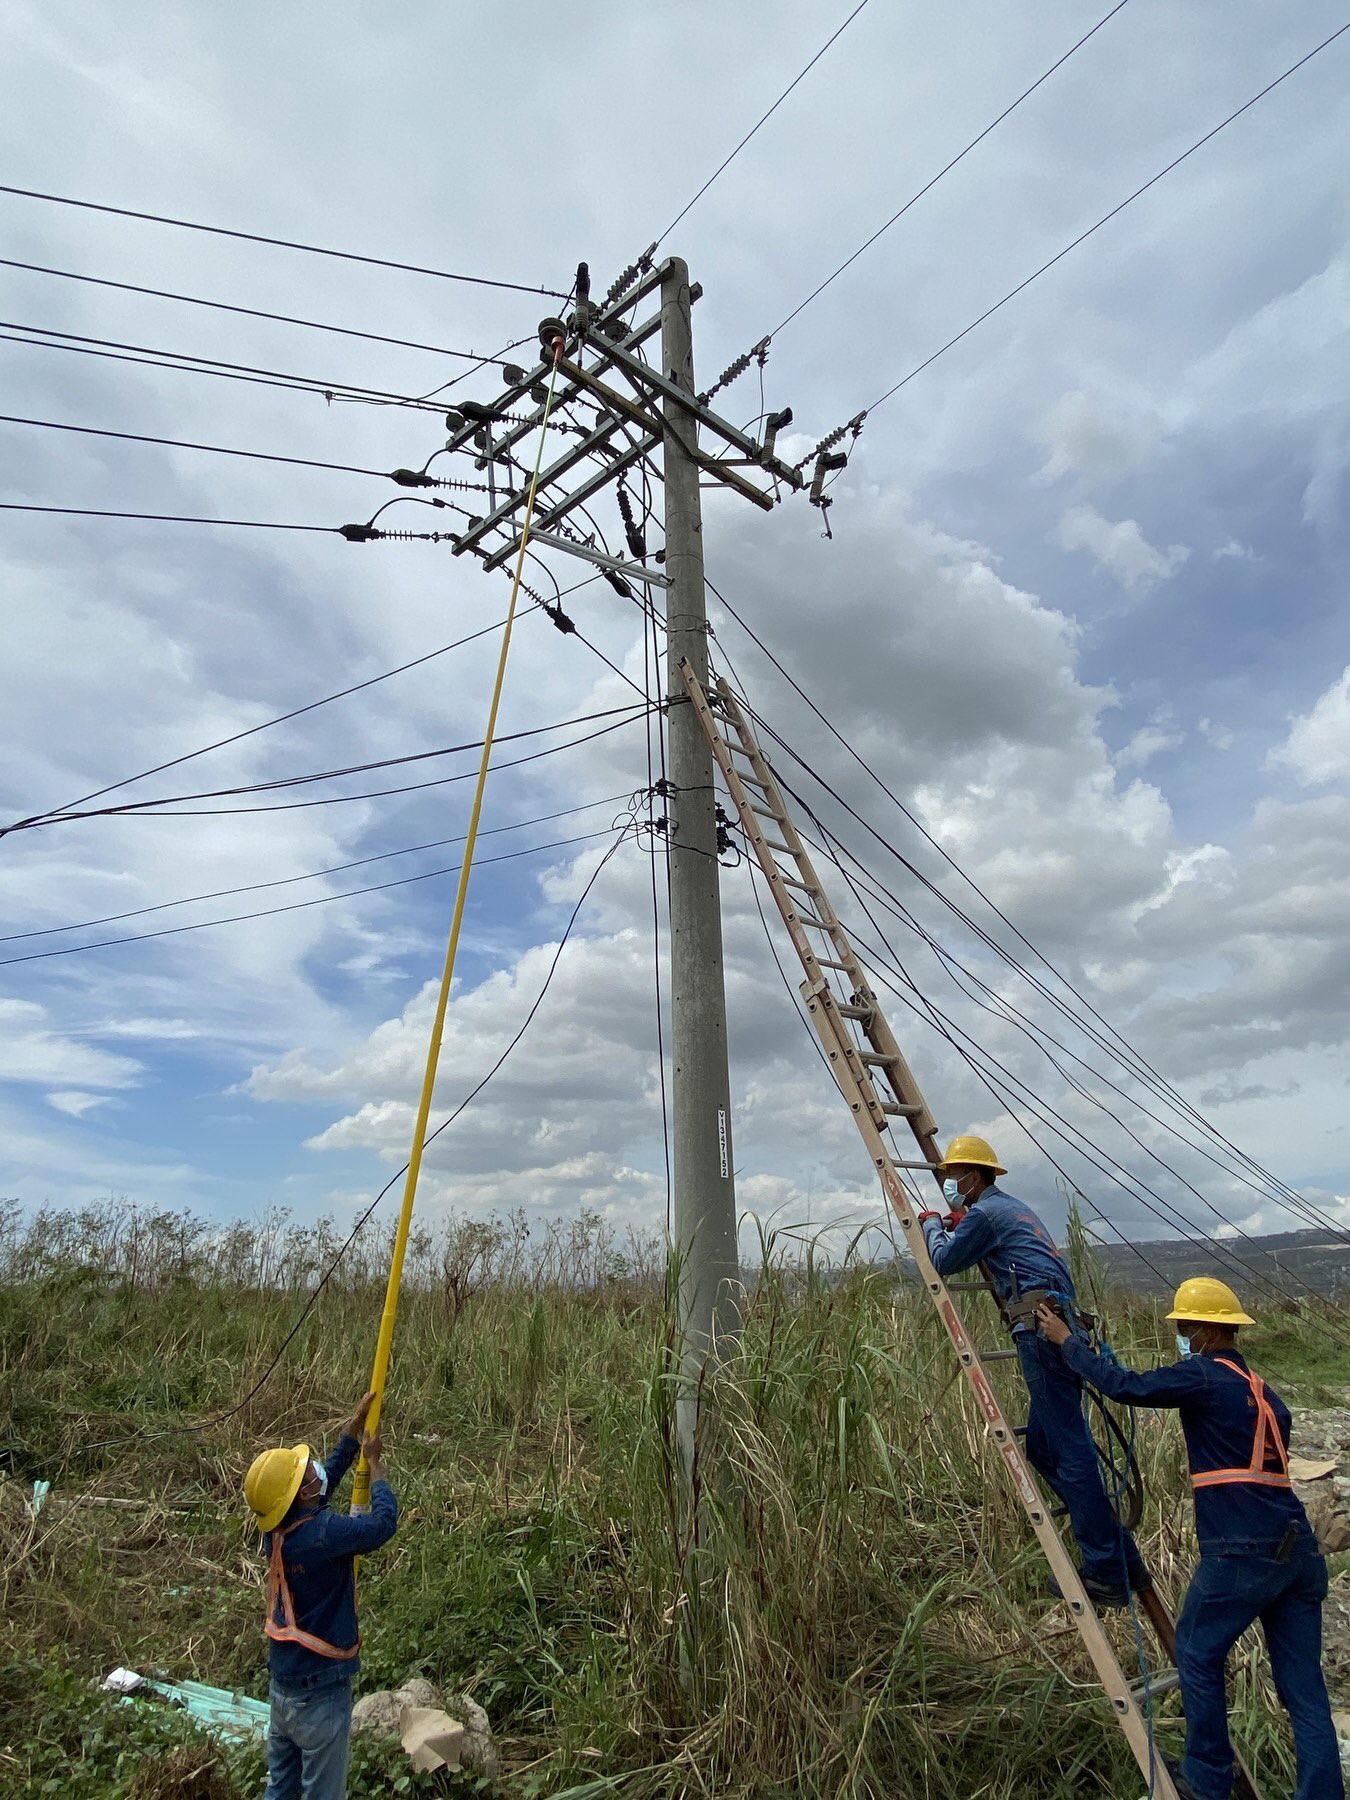 Meralco electric crews in action in Cebu resorting to manual action to restore power while waiting for our equipment to arrive after the typhoon